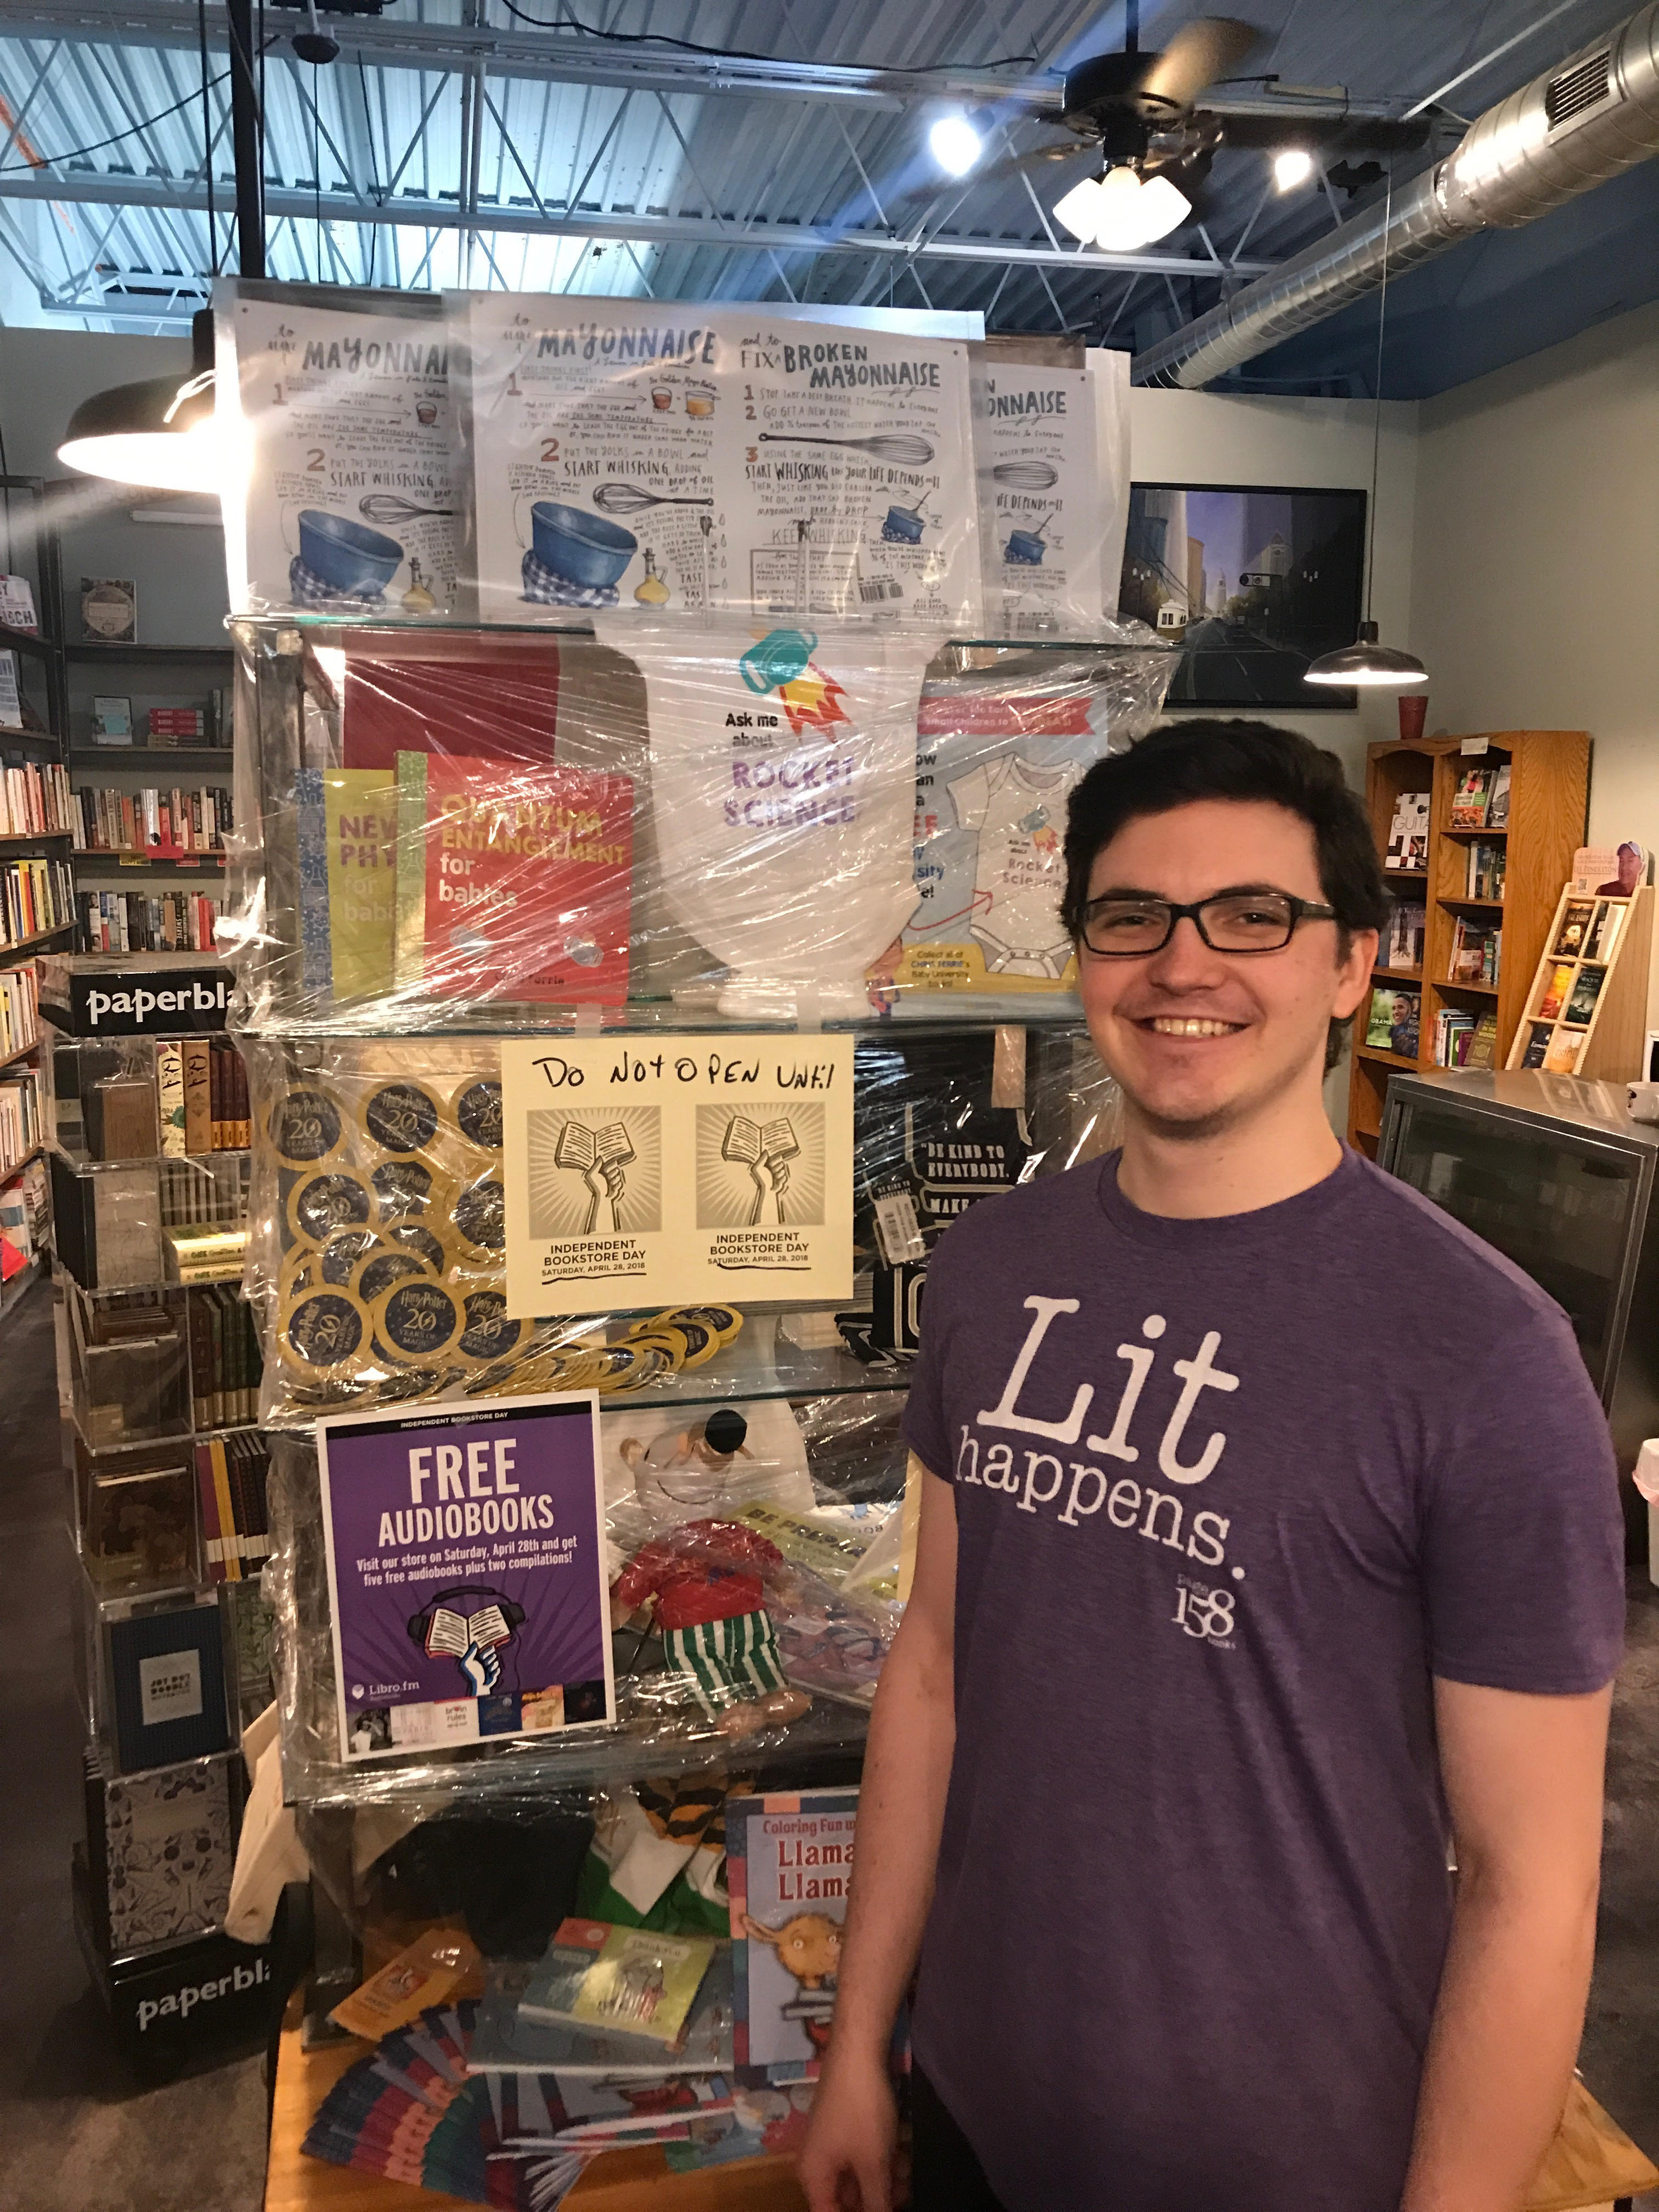 Bookseller Josh Lucey shows off a case of shrink-wrapped IBD merchandise at Page 158 Books.